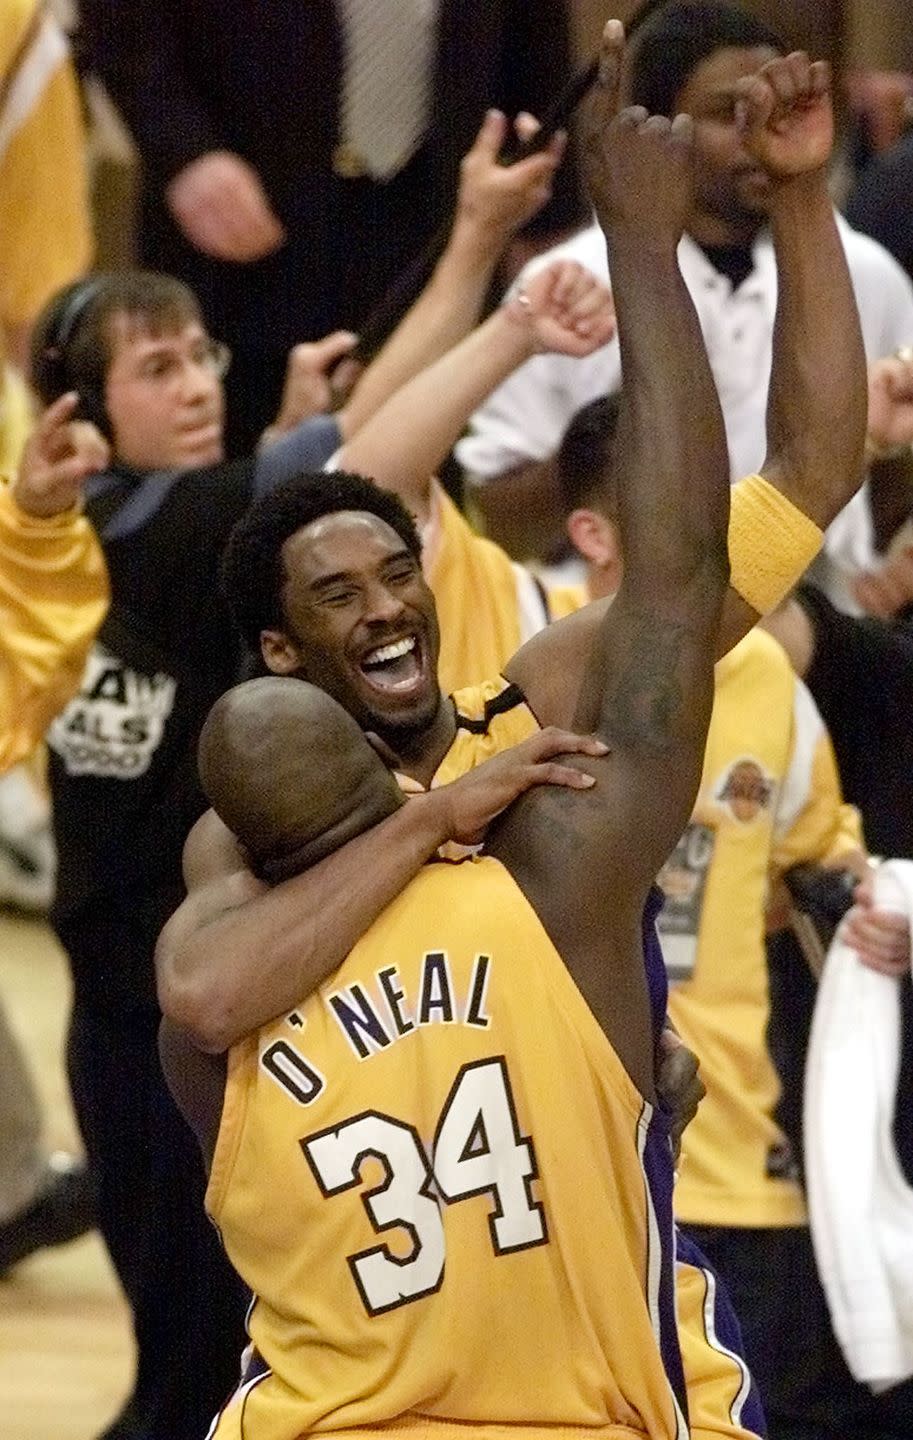 kobe bryant jumps into the arms of shaquille o'nea